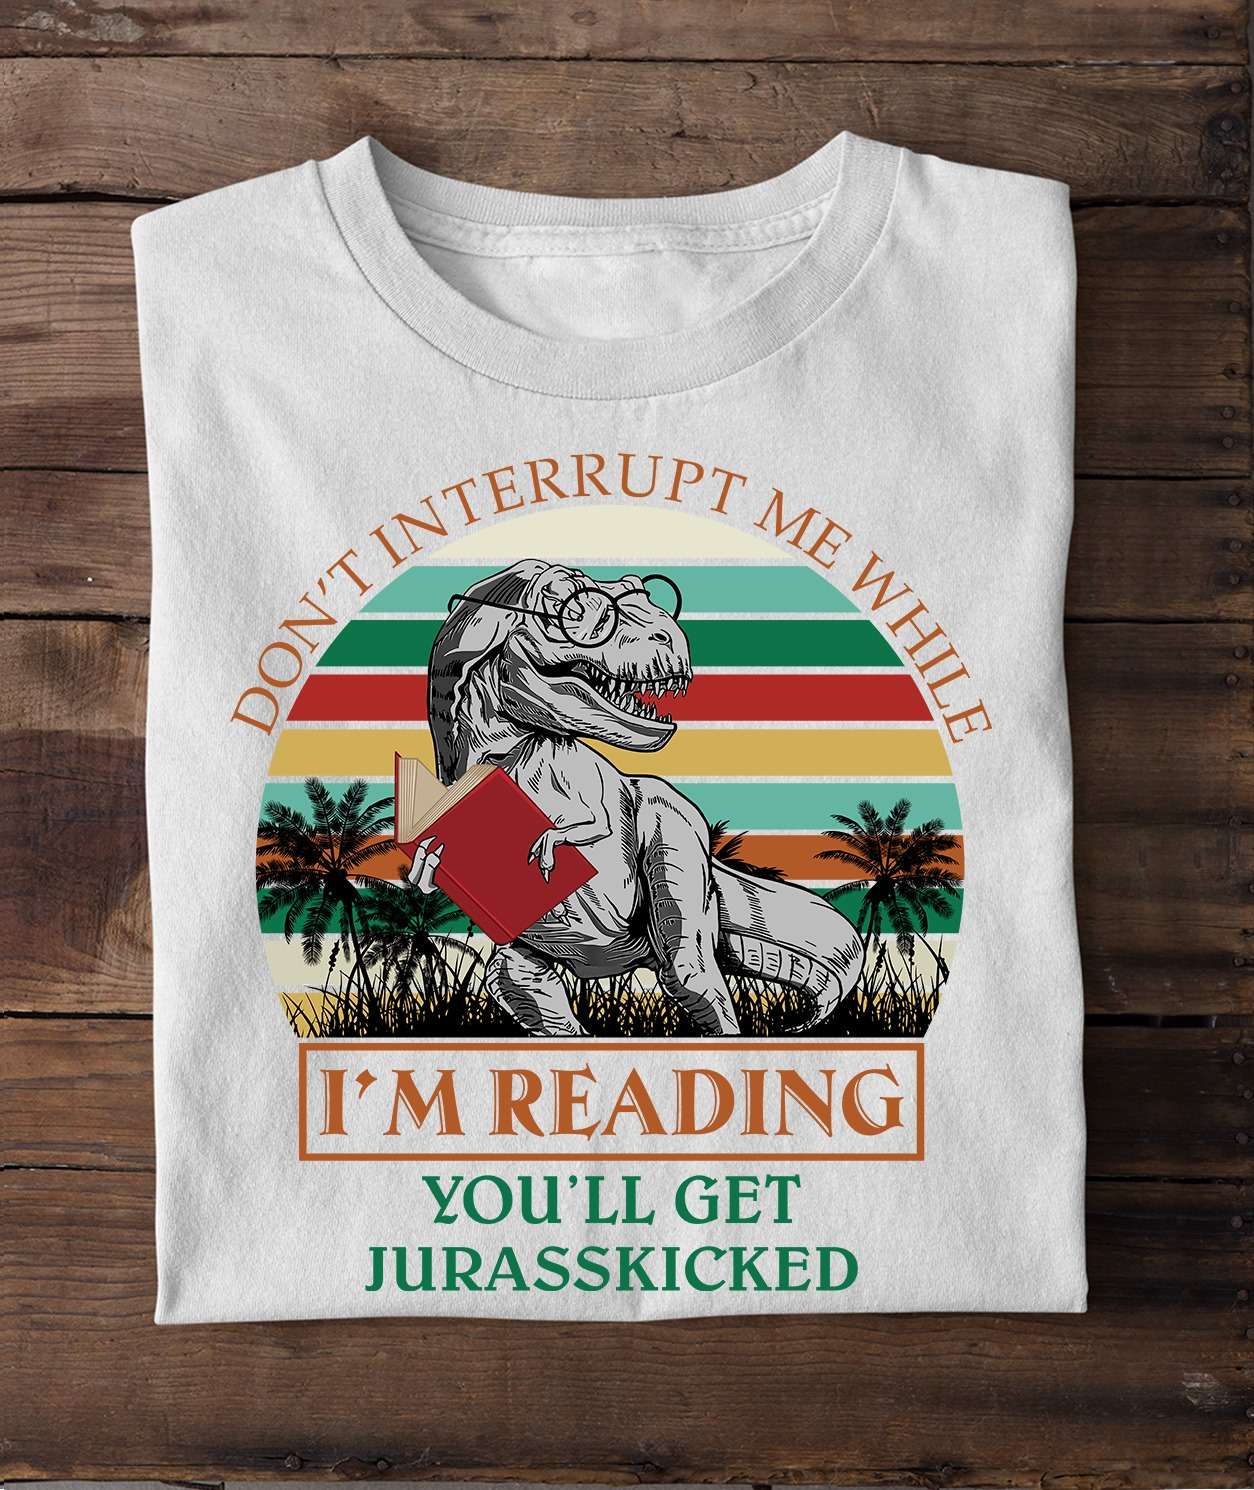 Don't interrupt me while I'm reading you'll get jurasskicked - T-rex reading books